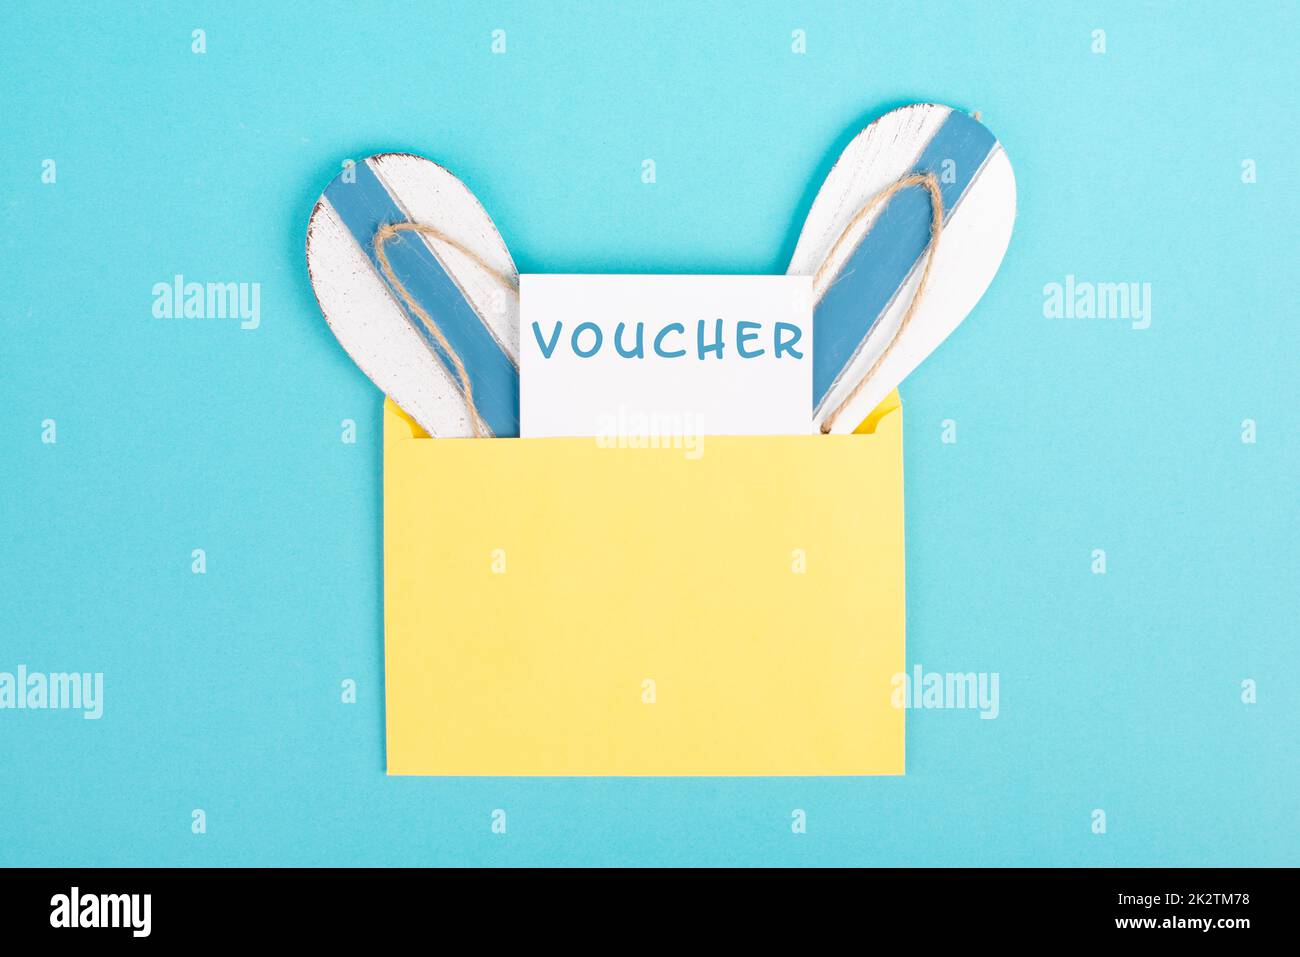 Blue colored summer and vacation background, voucher, flip flops in an envelope, copy space for text, holiday and tourism concept Stock Photo